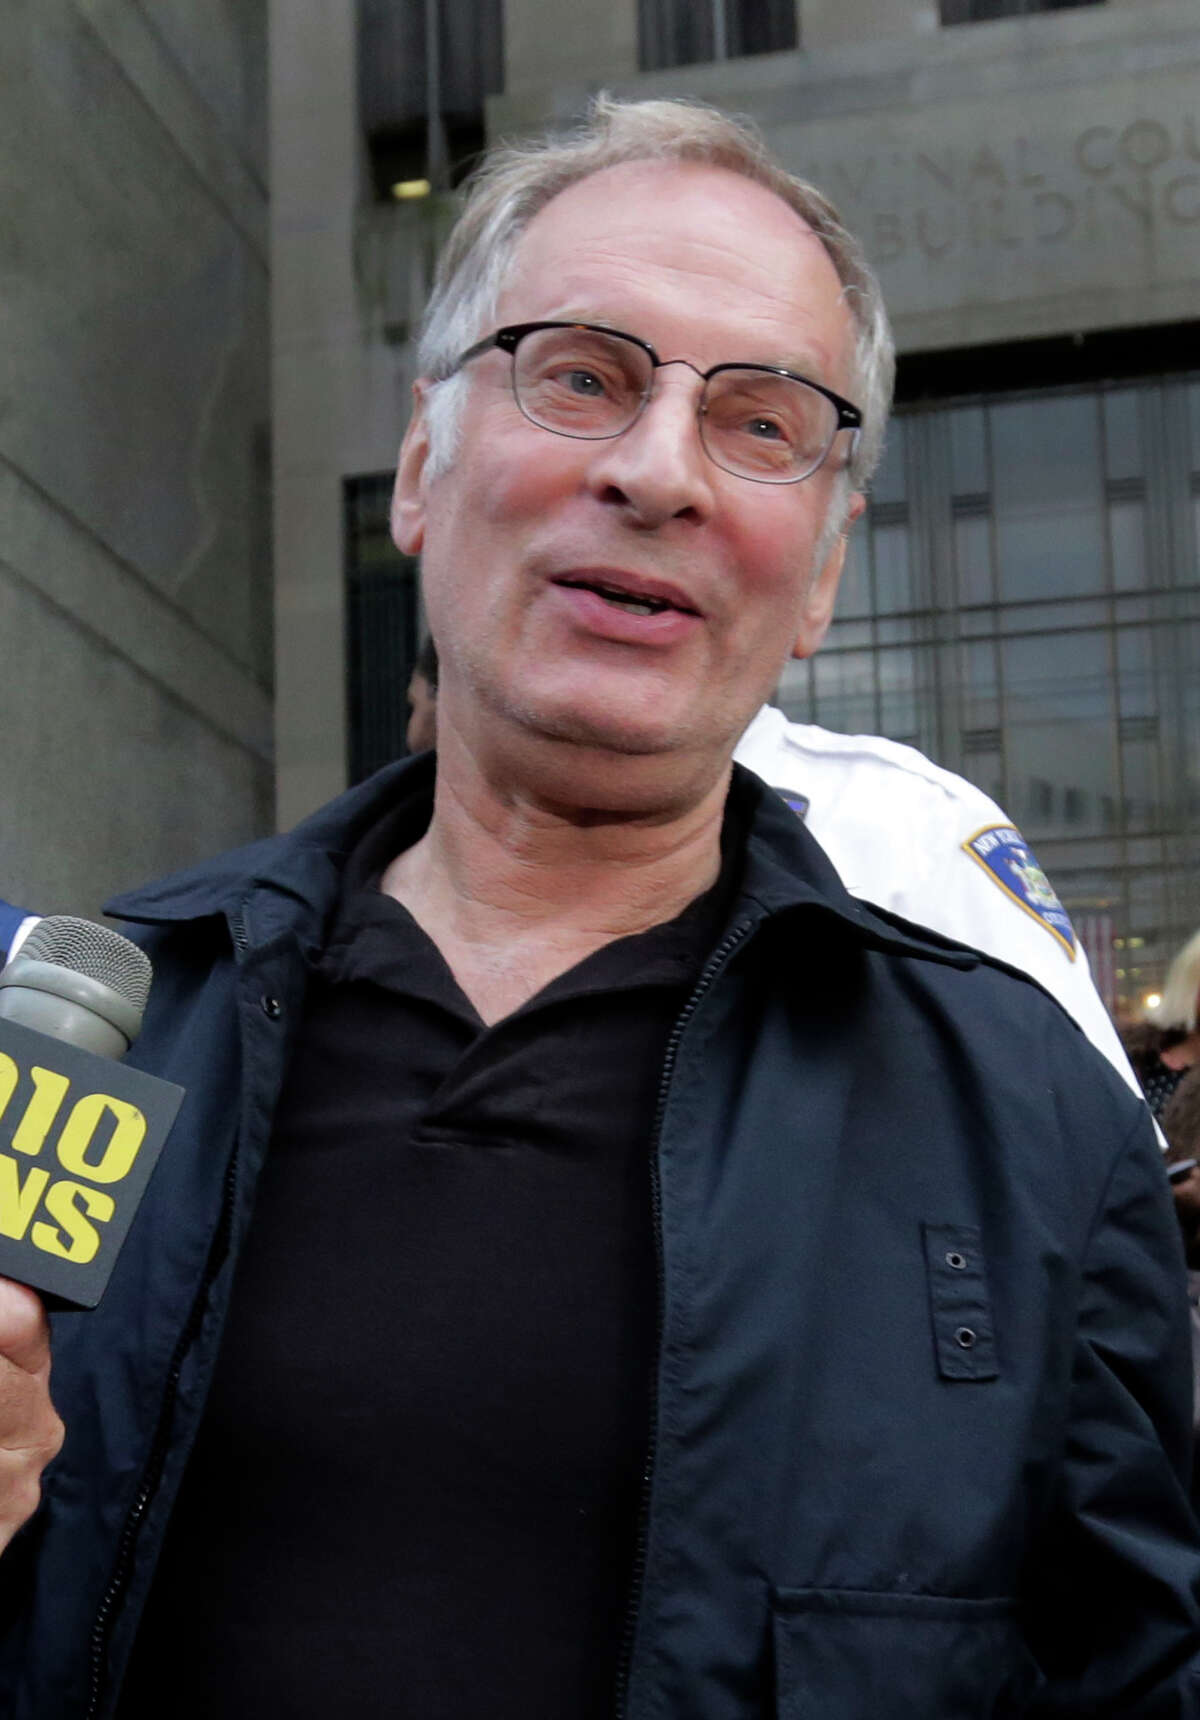 Bernard Goetz leaves Manhattan criminal court, in New York, Saturday, Nov. 2, 2013. Subway vigilante Bernie Goetz, who ignited a national furor over racism and gun control after he shot four panhandling youths on a train in the 1980s, was arrested on drug charges. (AP Photo/Richard Drew)